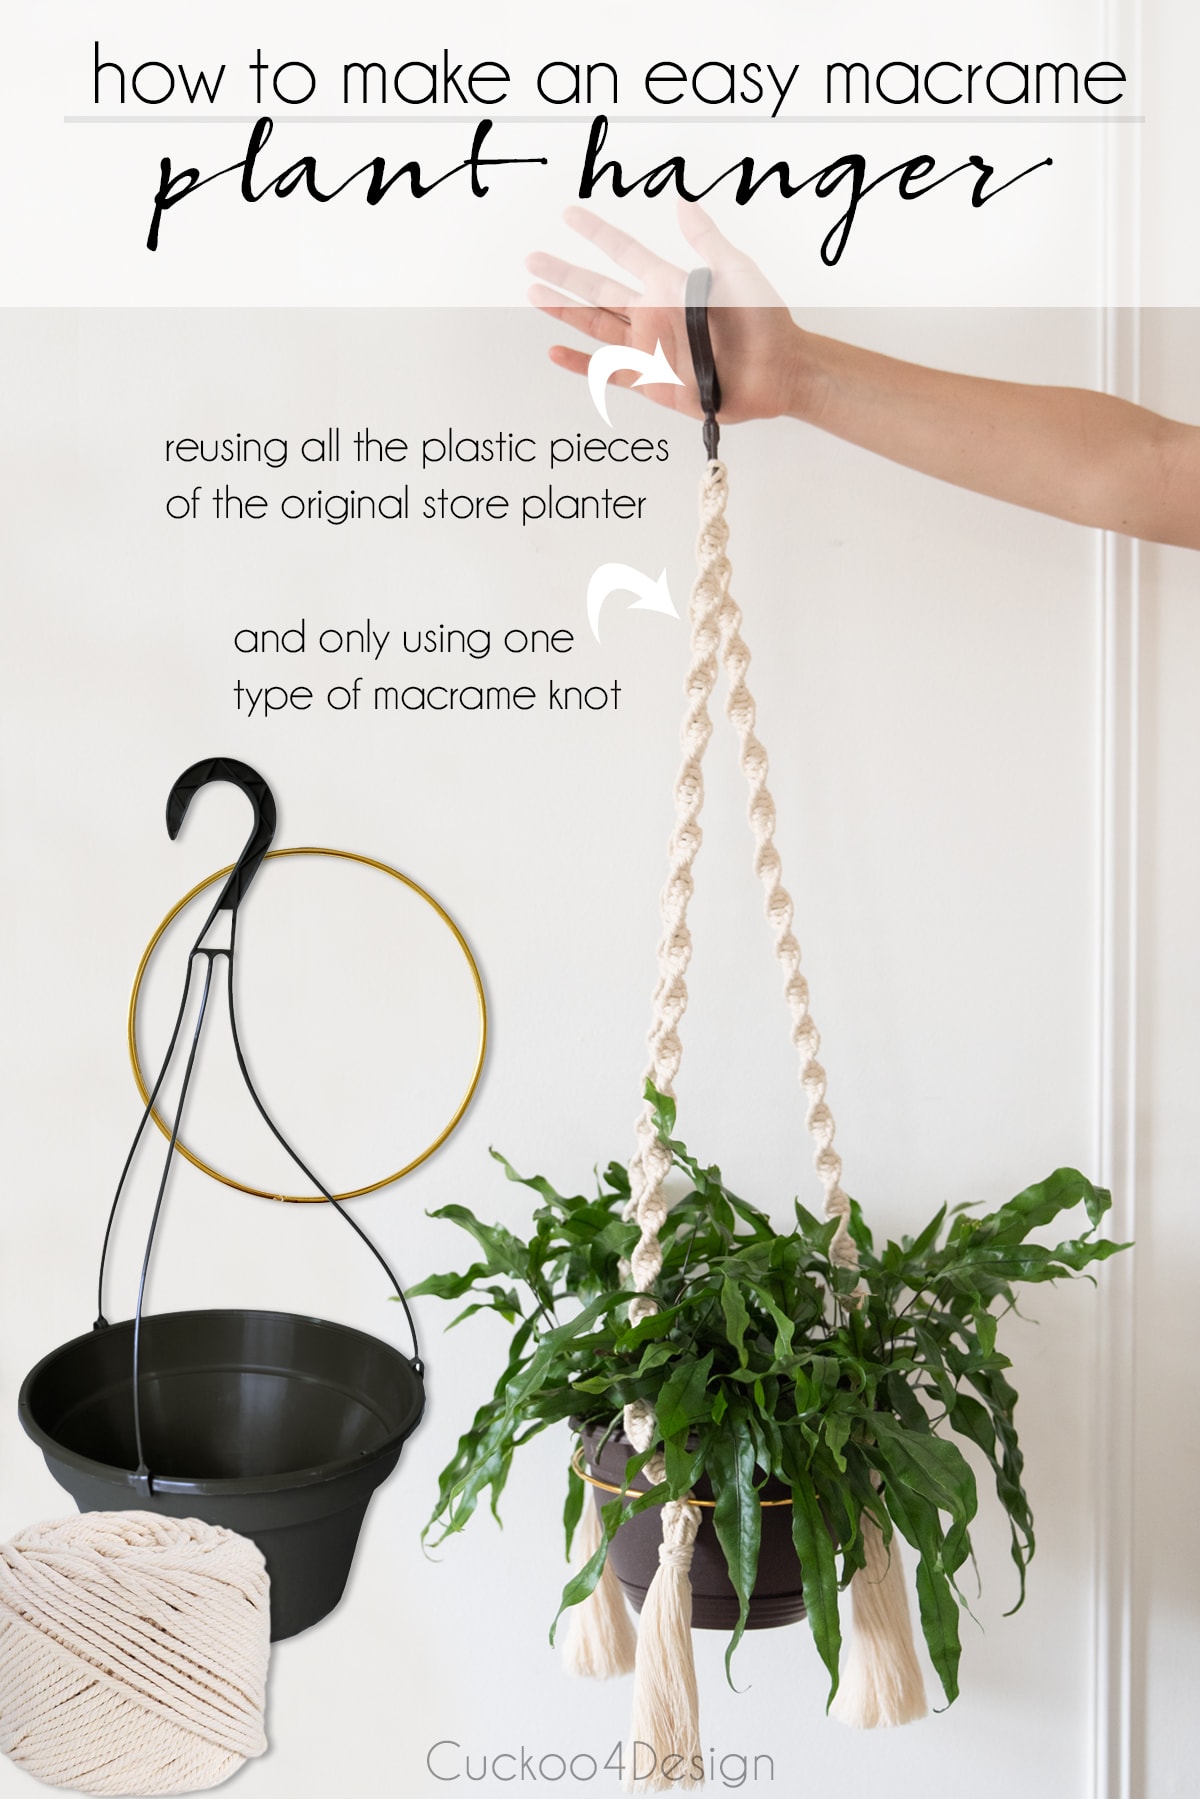 How to make a macrame plant hanger the easy way with only one knot